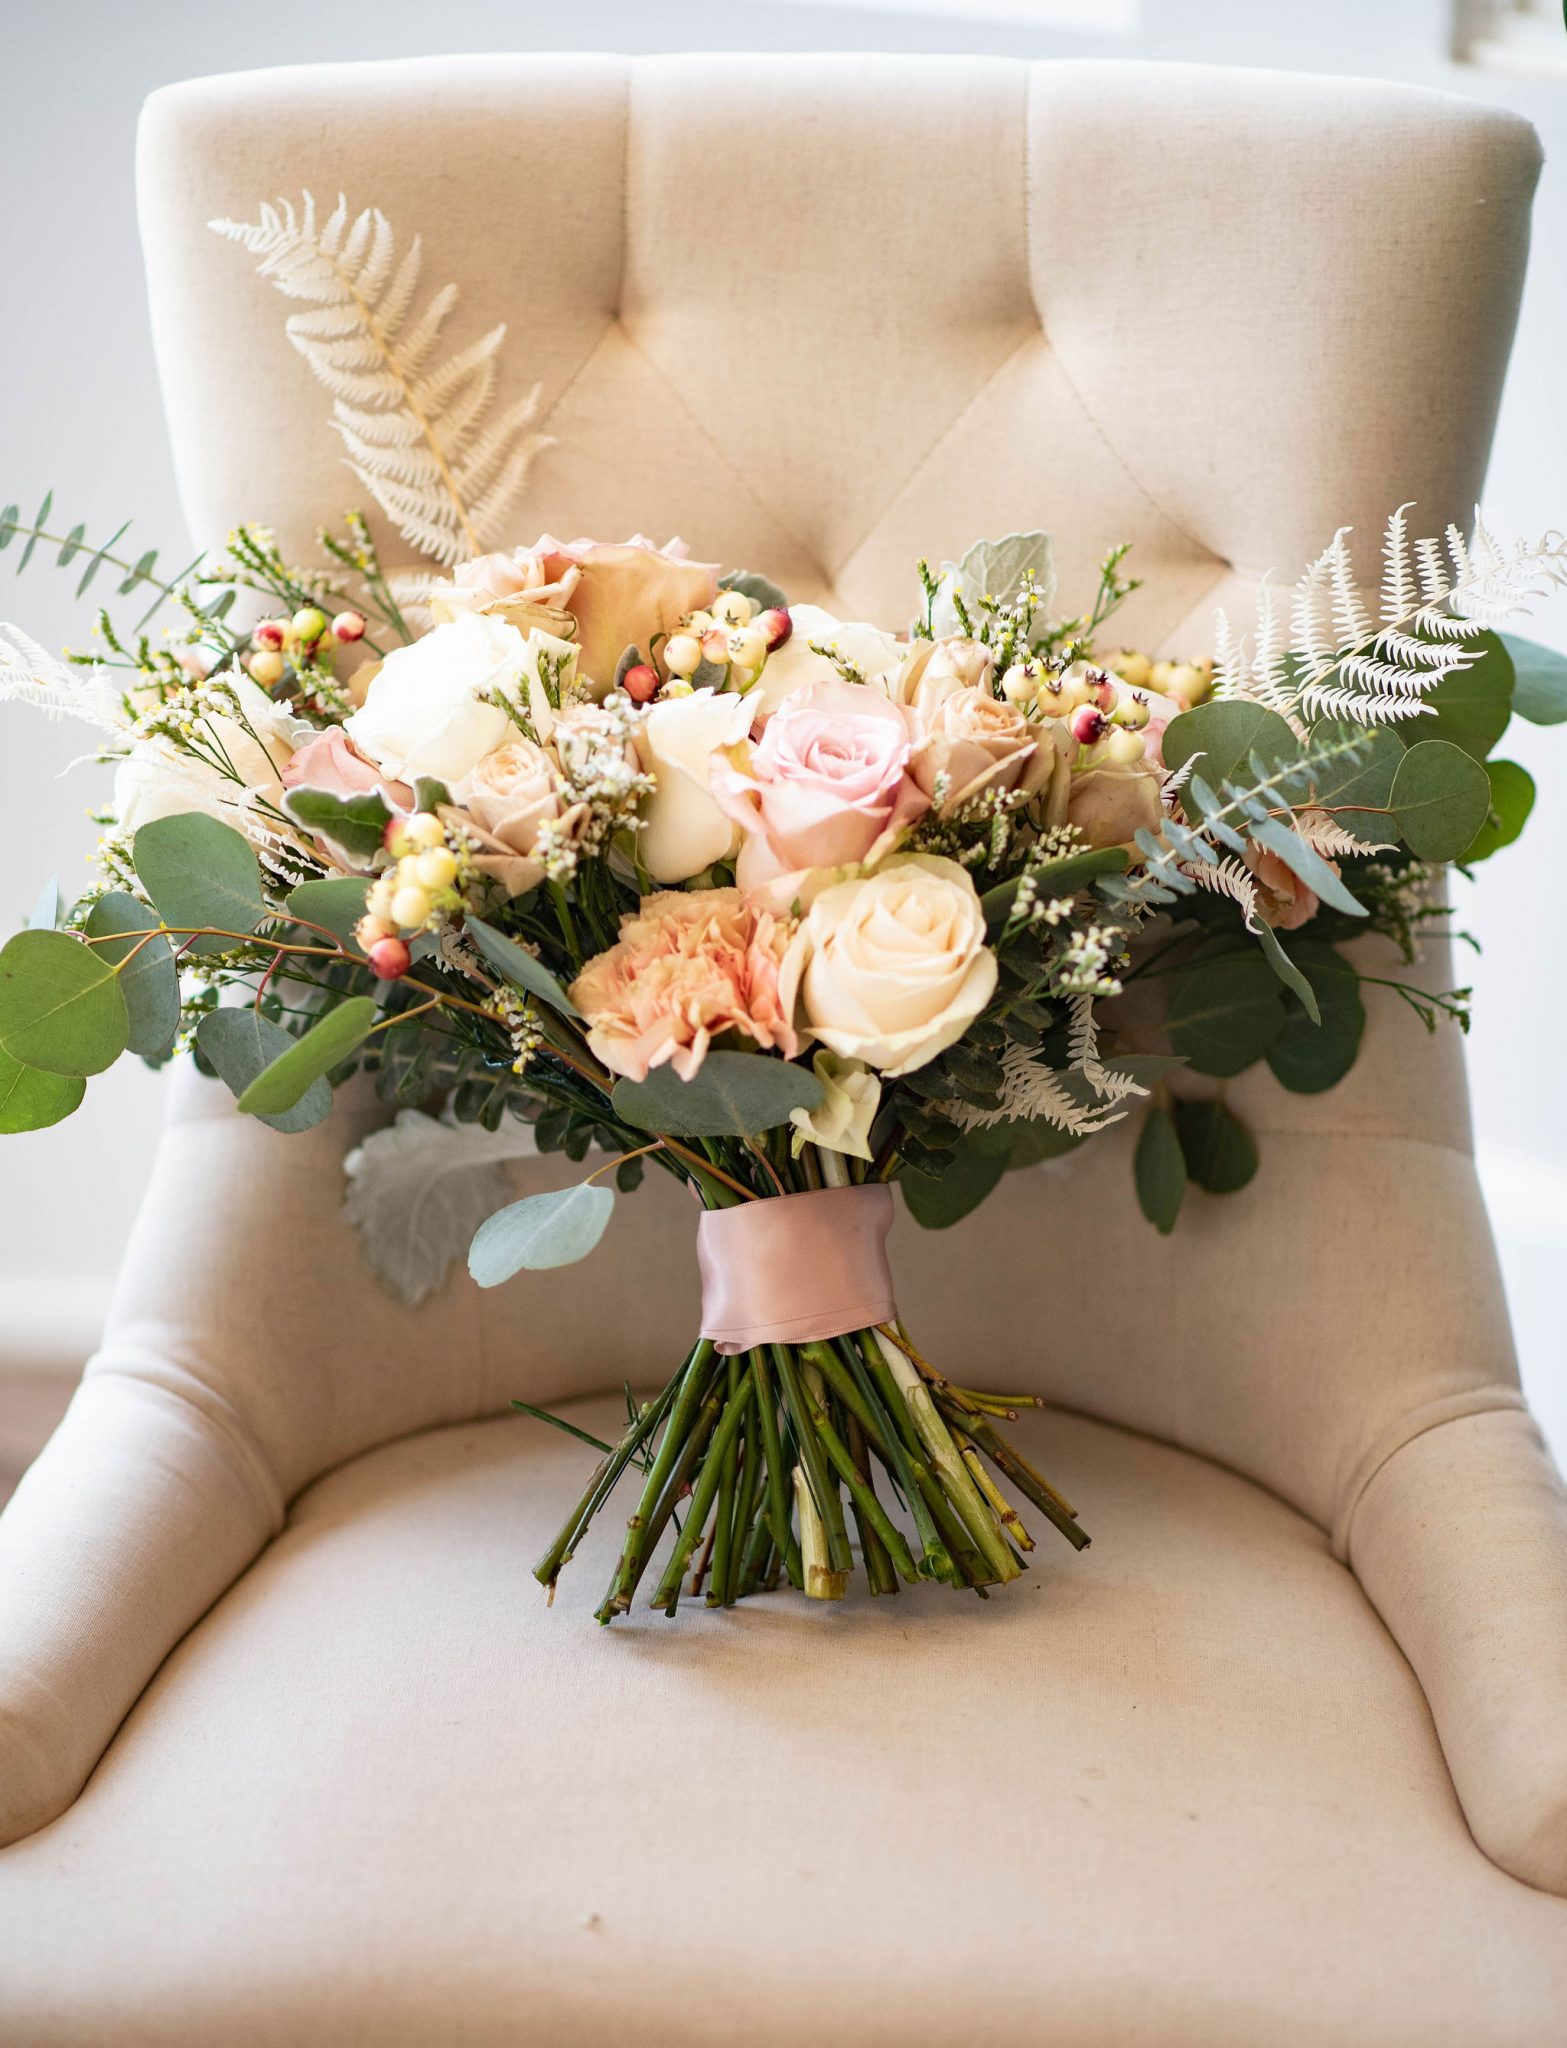 Blush bridal bouquet photographed on a champagne chaise chair